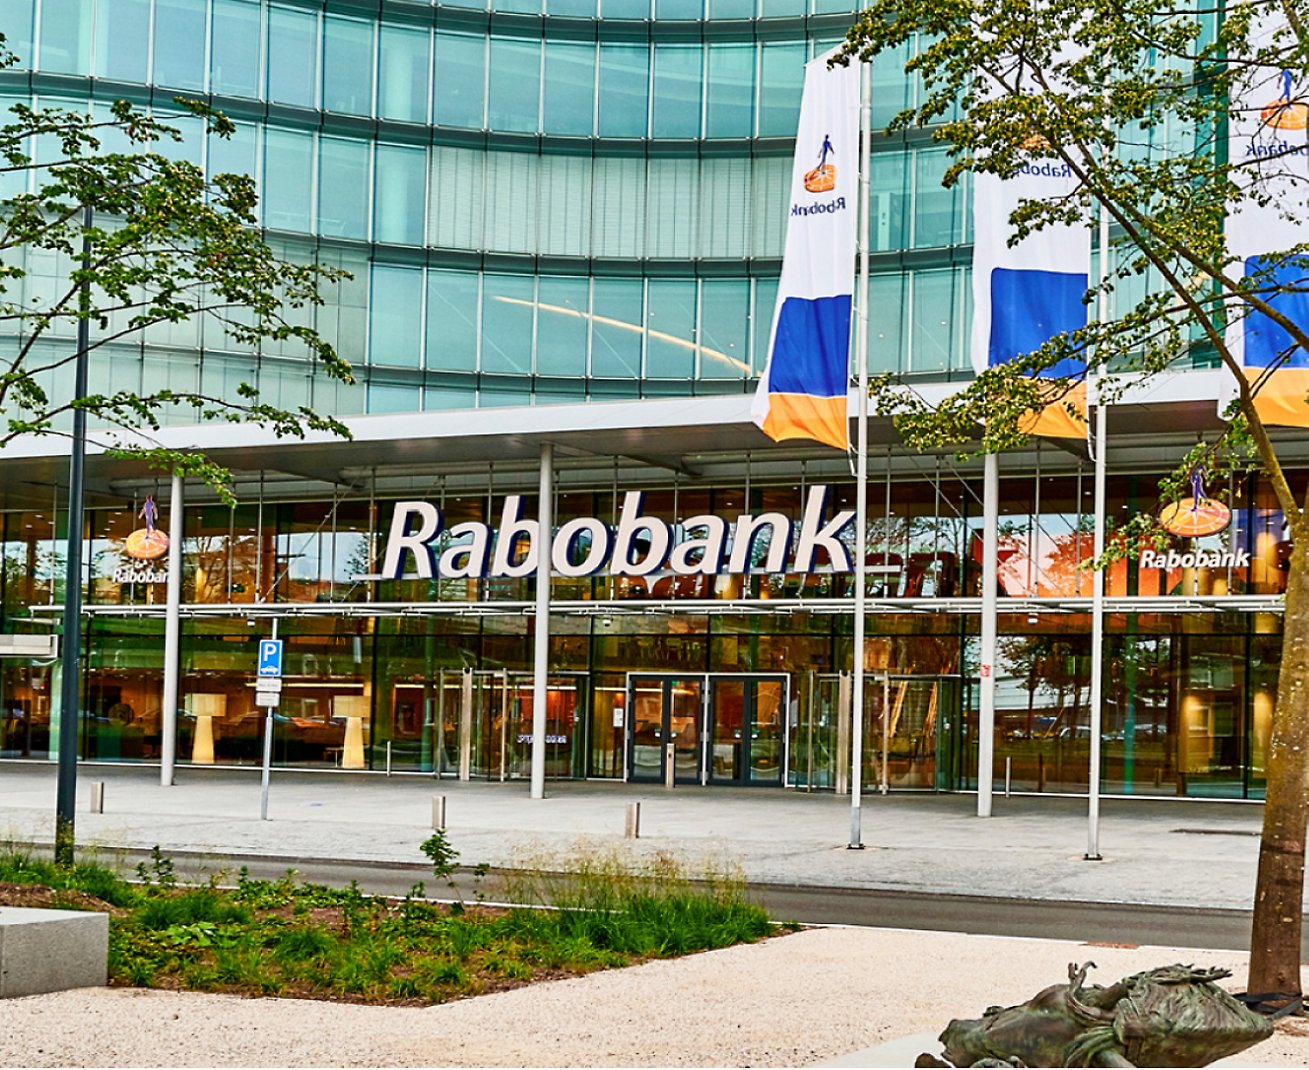 A building with a sign that says Rabobank.